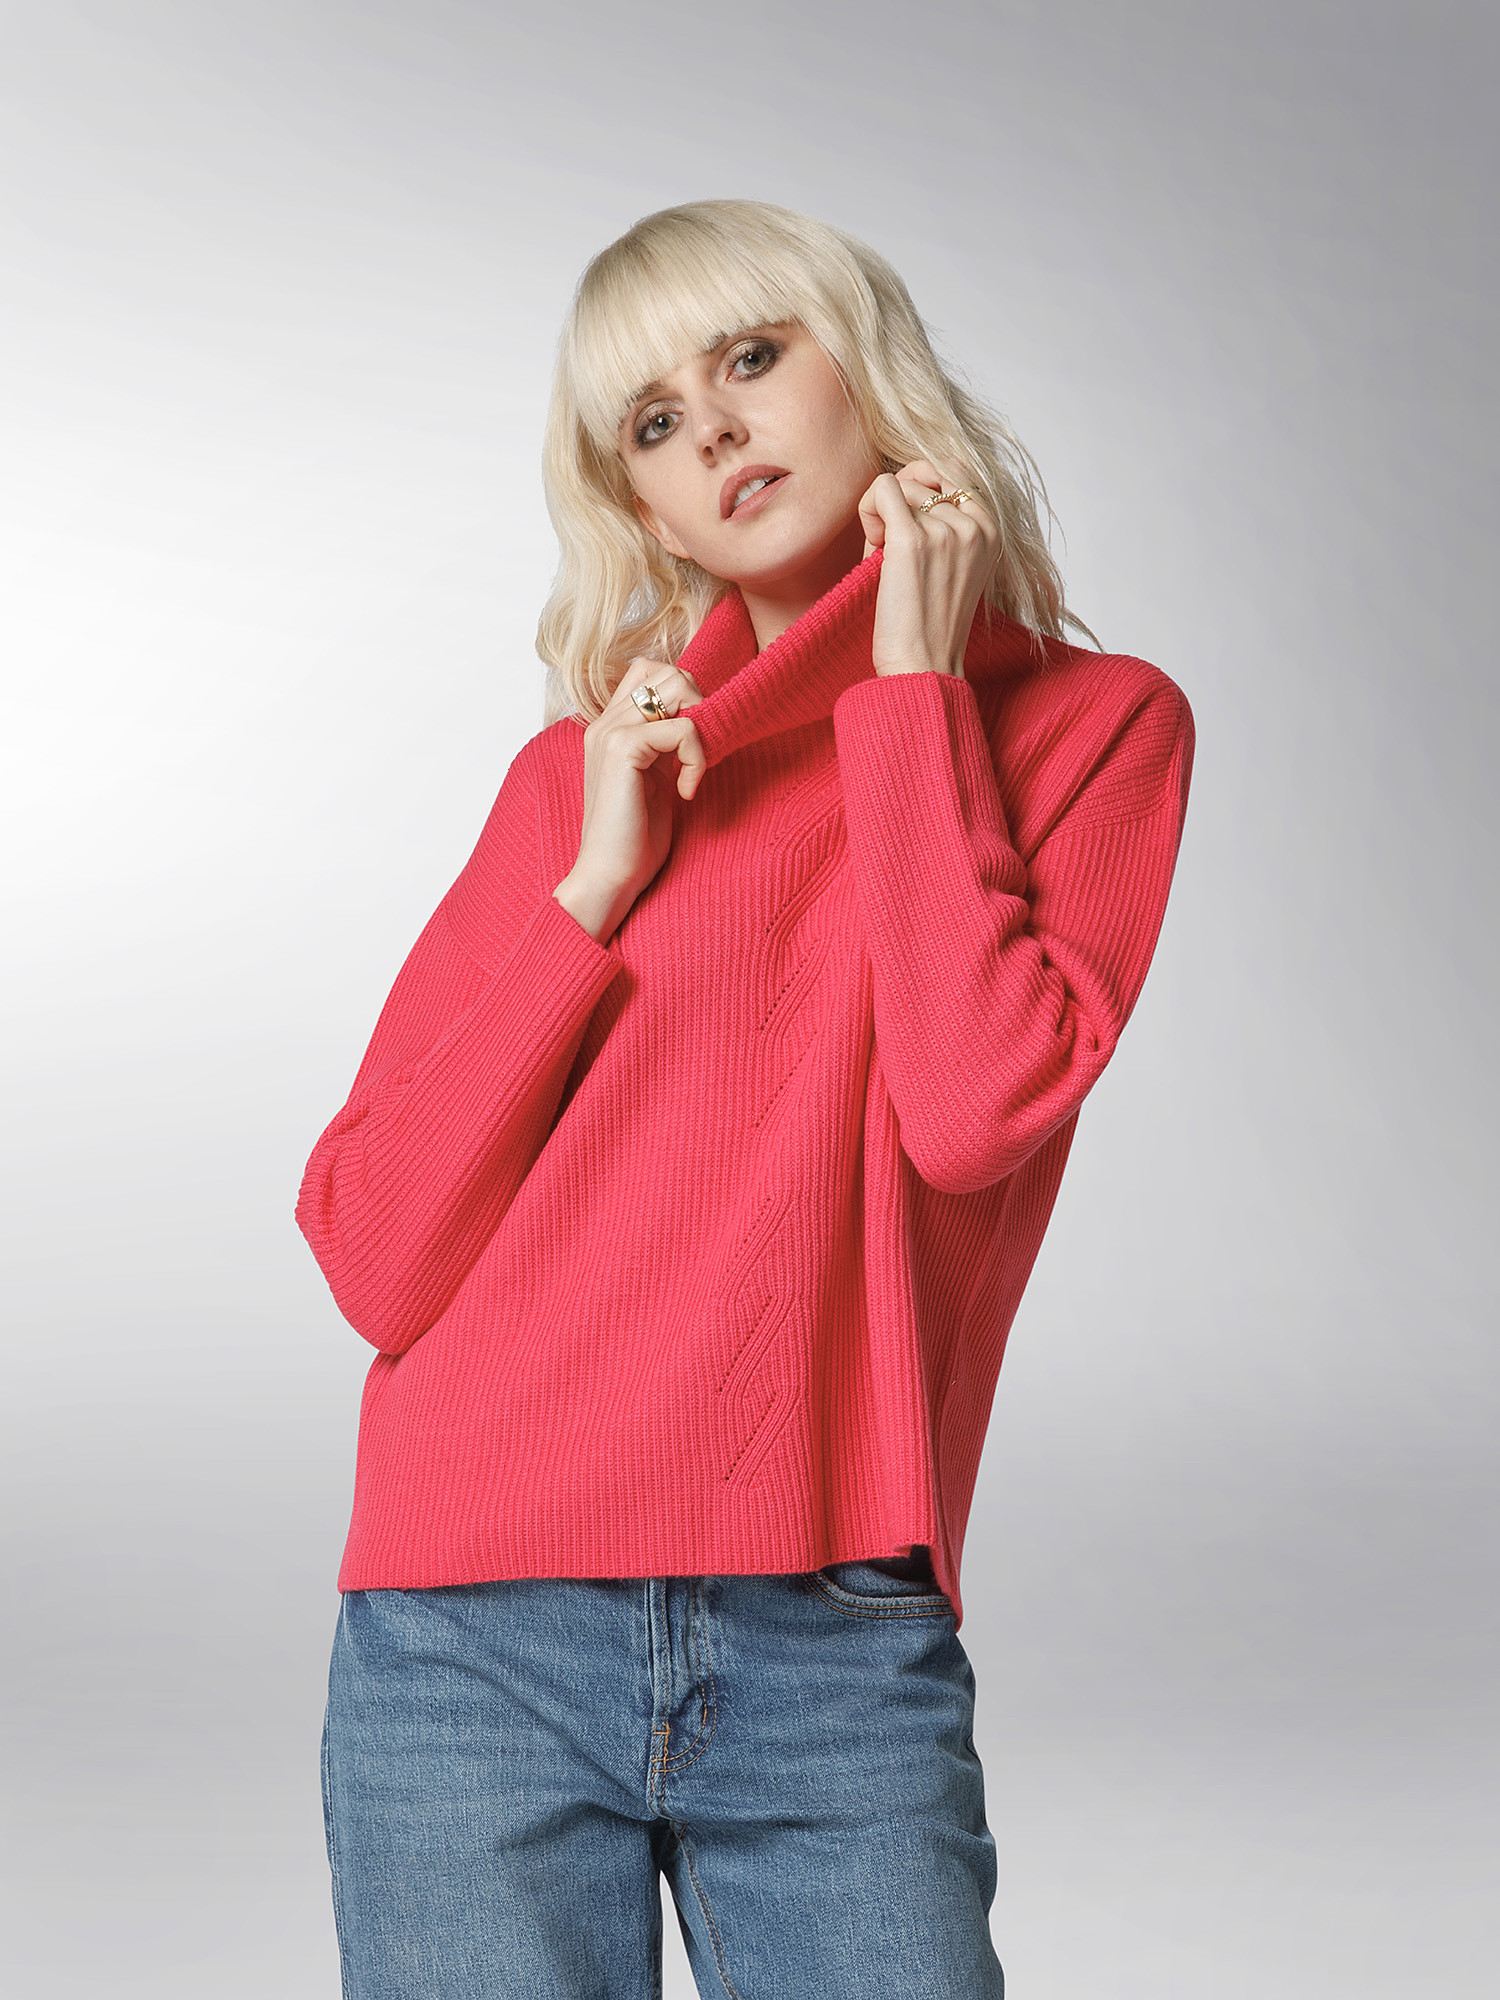 K Collection - Pullover dolcevita in lana extrafine, Rosa fuxia, large image number 4